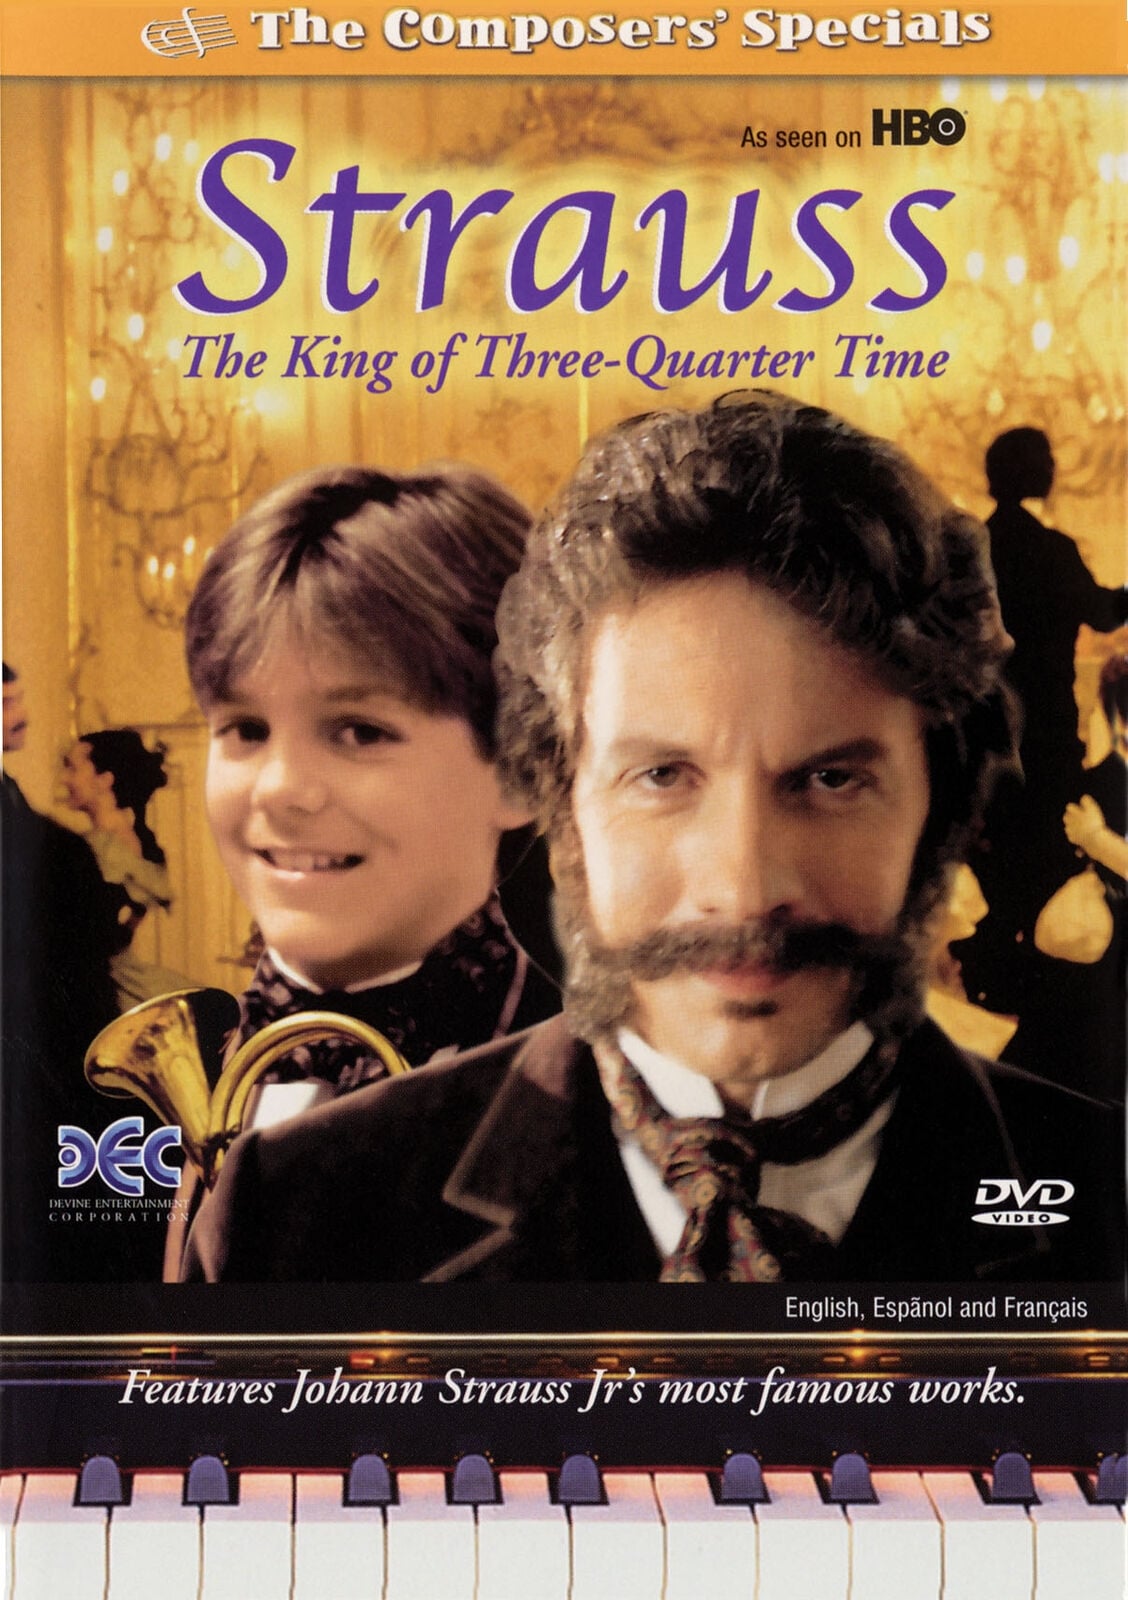 Strauss: The King of Three-Quarter Time (1995)